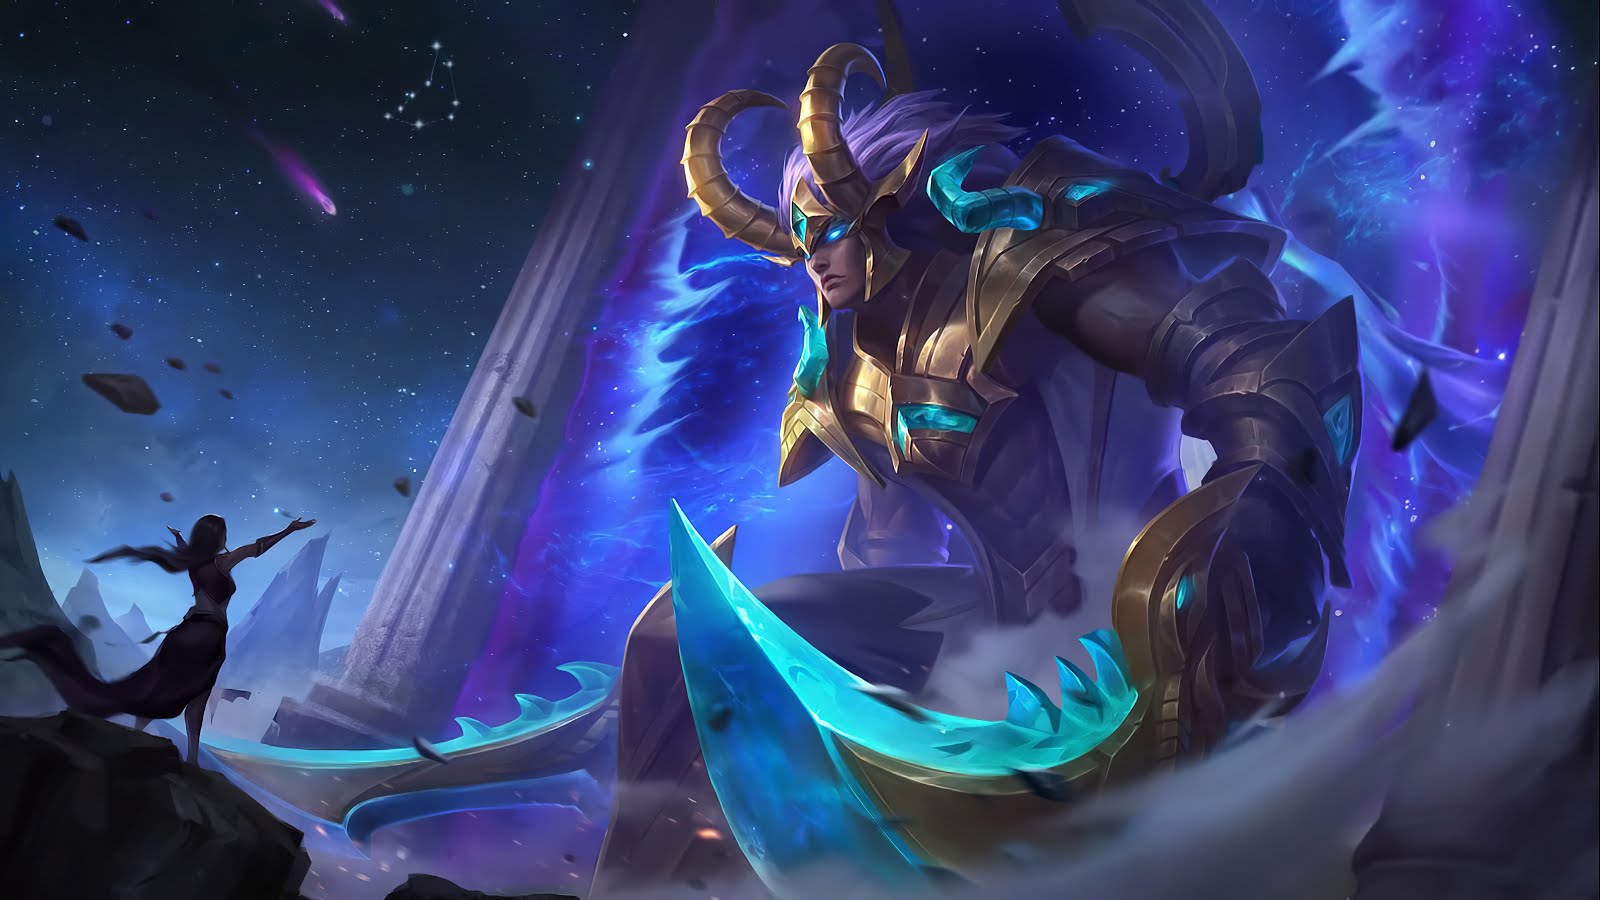 Mobile Legends Wallpapers Hd All Zodiac Skins Wallpapers Hd